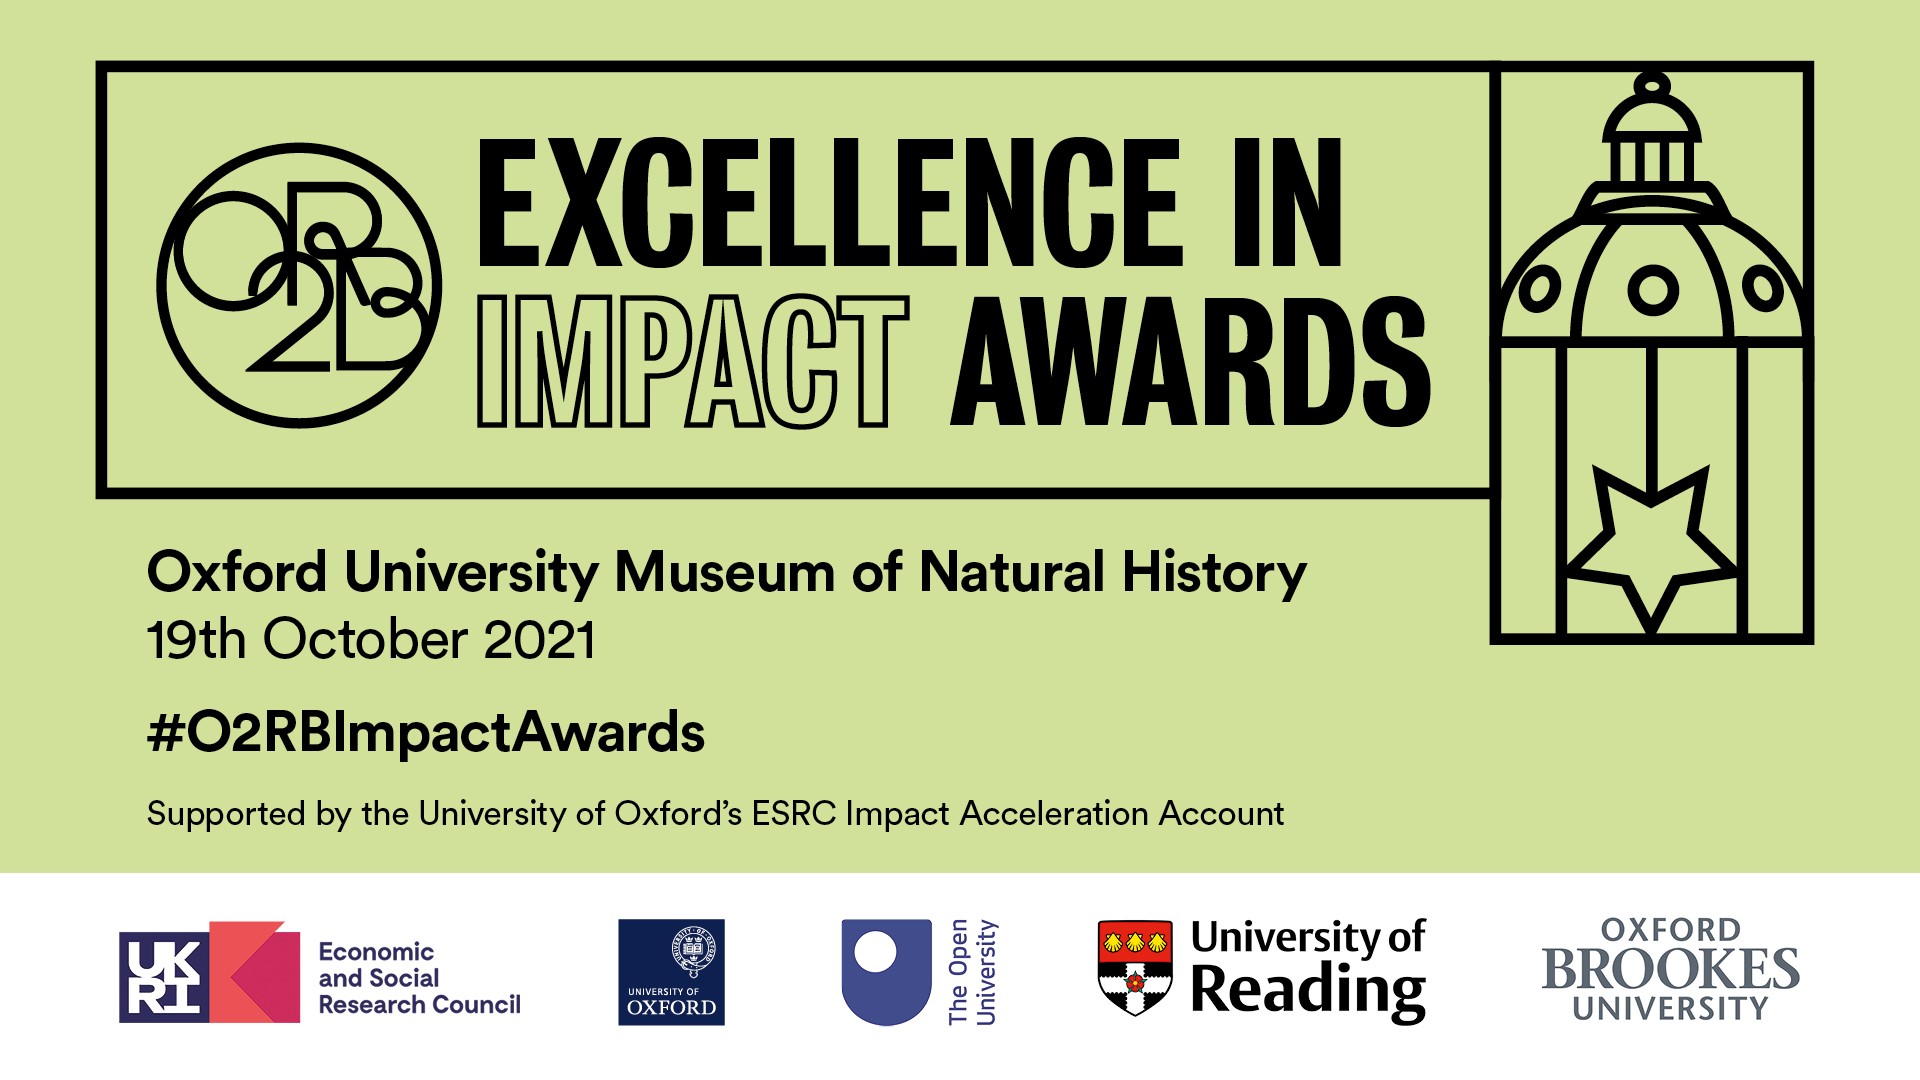 O²RB Excellence in Impact Awards, Oxford University Museum of Natural History, 19th October 2021, #O2RBImpactAwards Supported by the ESRC Impact Acceleration Account